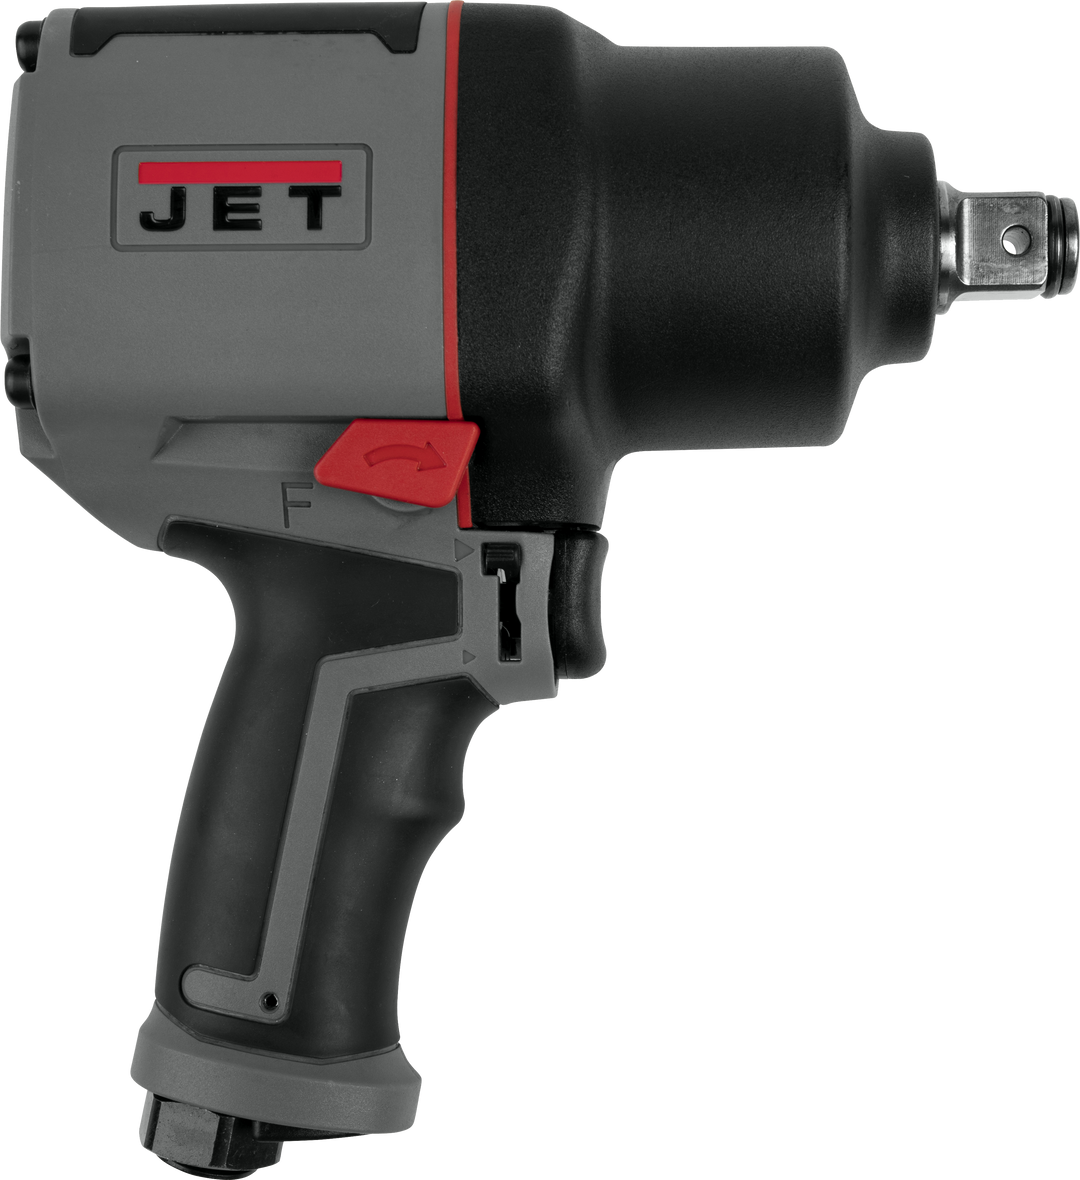 JET 3/4" Composite Impact Wrench